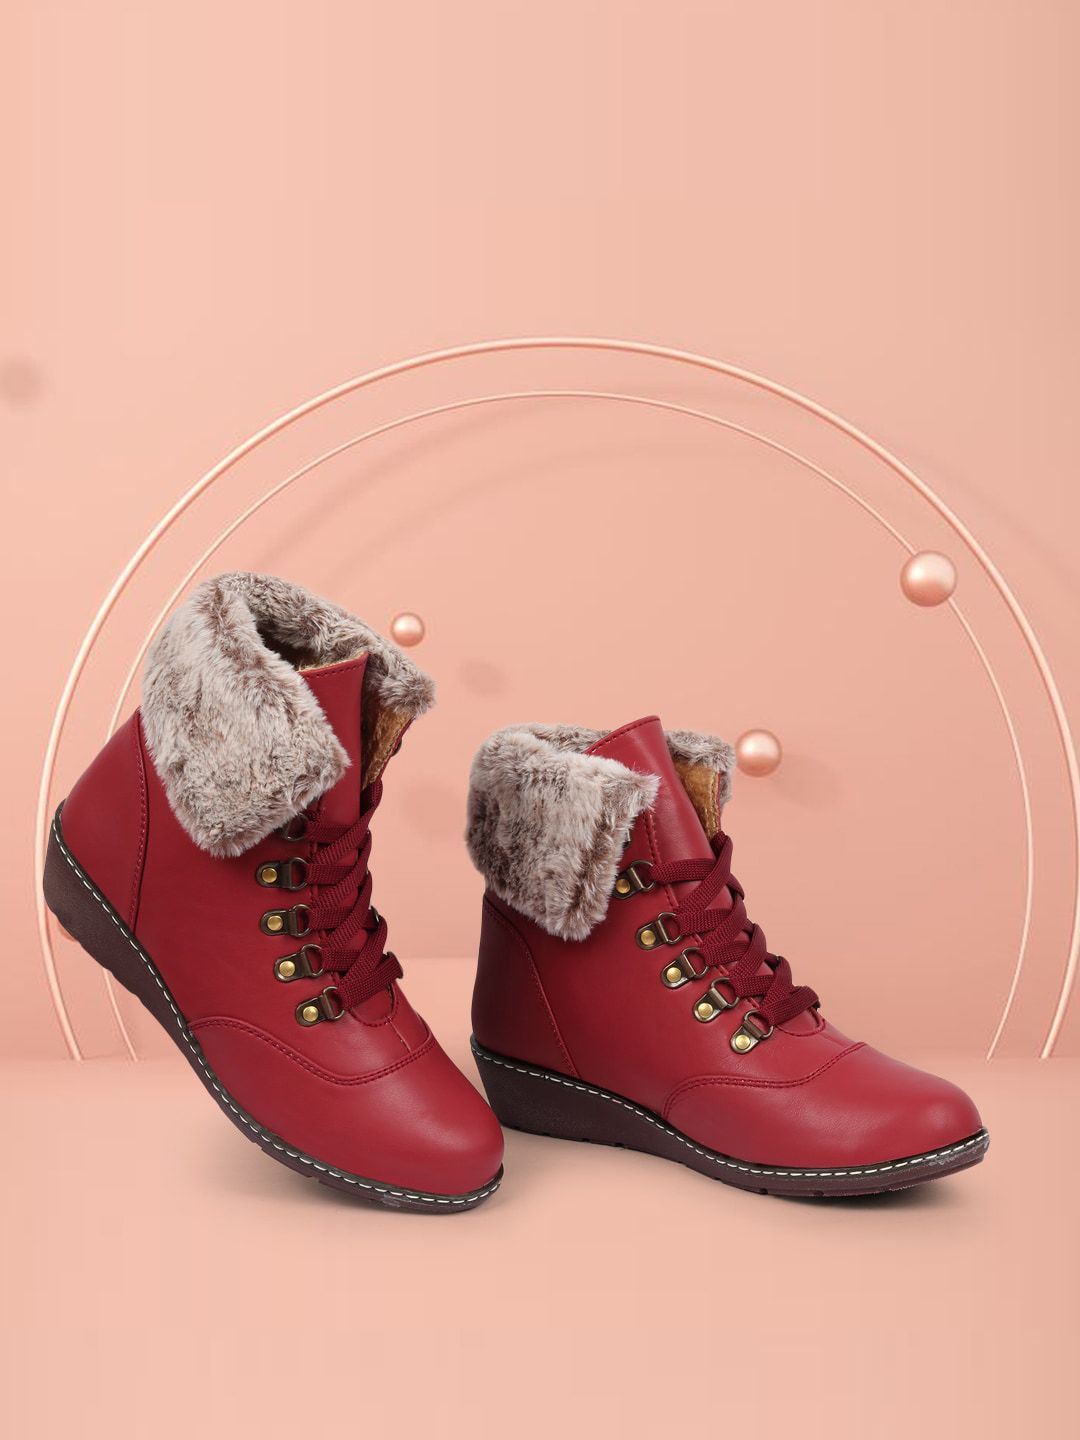 Alishtezia Women Red High-Top Flat Boots Price in India